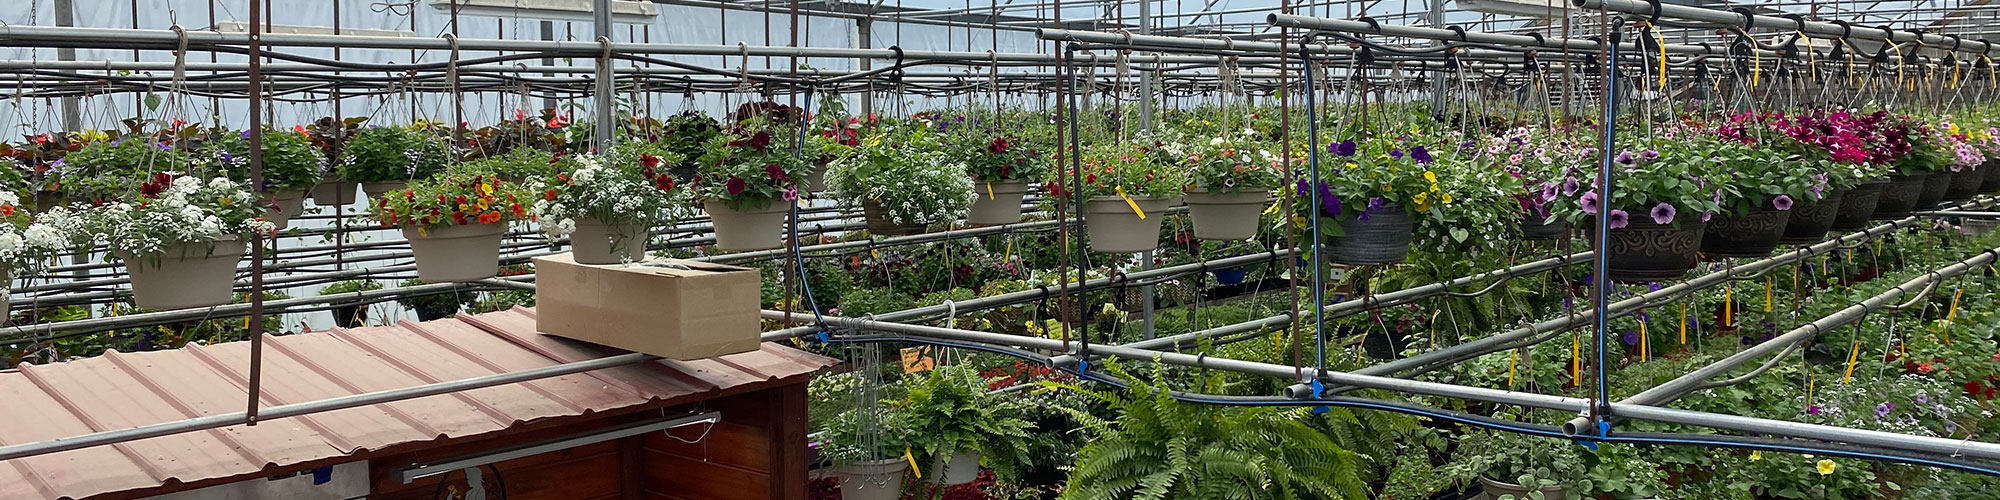 Greenhouses filled with fresh flowers and plants at Turnpike Greenhouse - Granton Wisconsin - flowers, houseplants, vegetables, progressive greenhouse, quality plants, planters, gifts